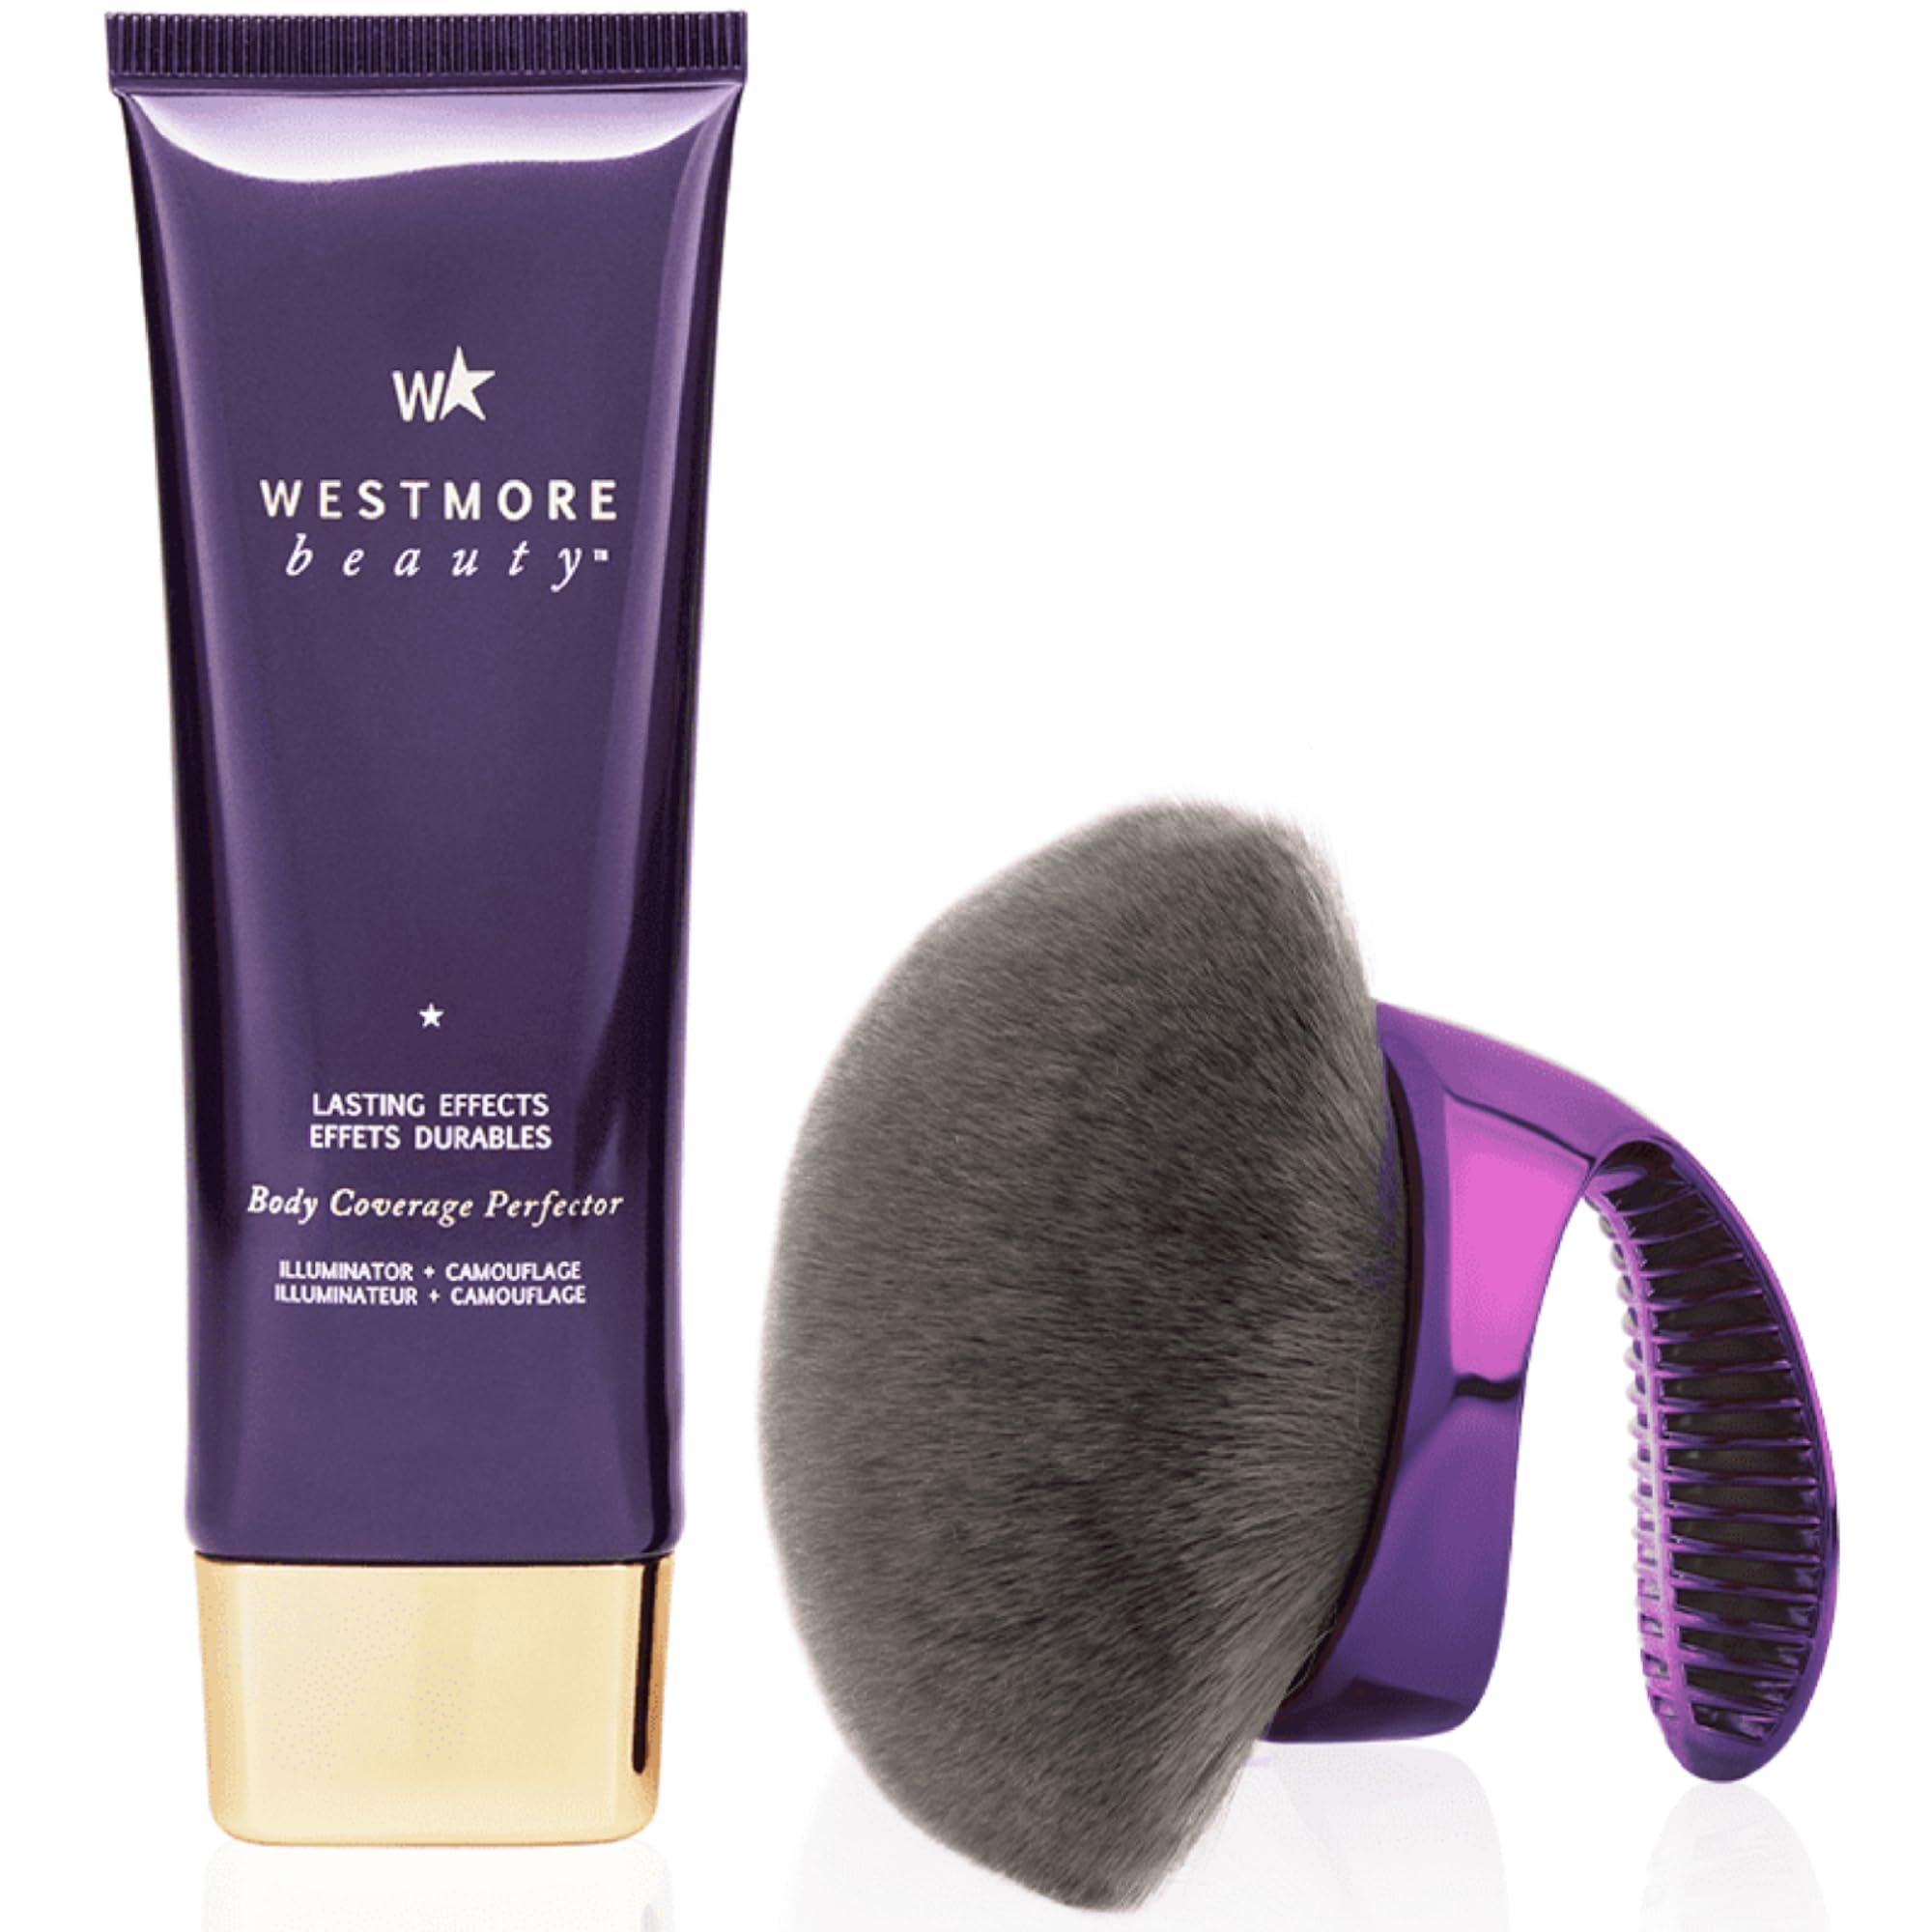 Westmore Beauty Body Coverage Perfector - Golden Radiance 3.5oz - Blend & Blur Body Brush